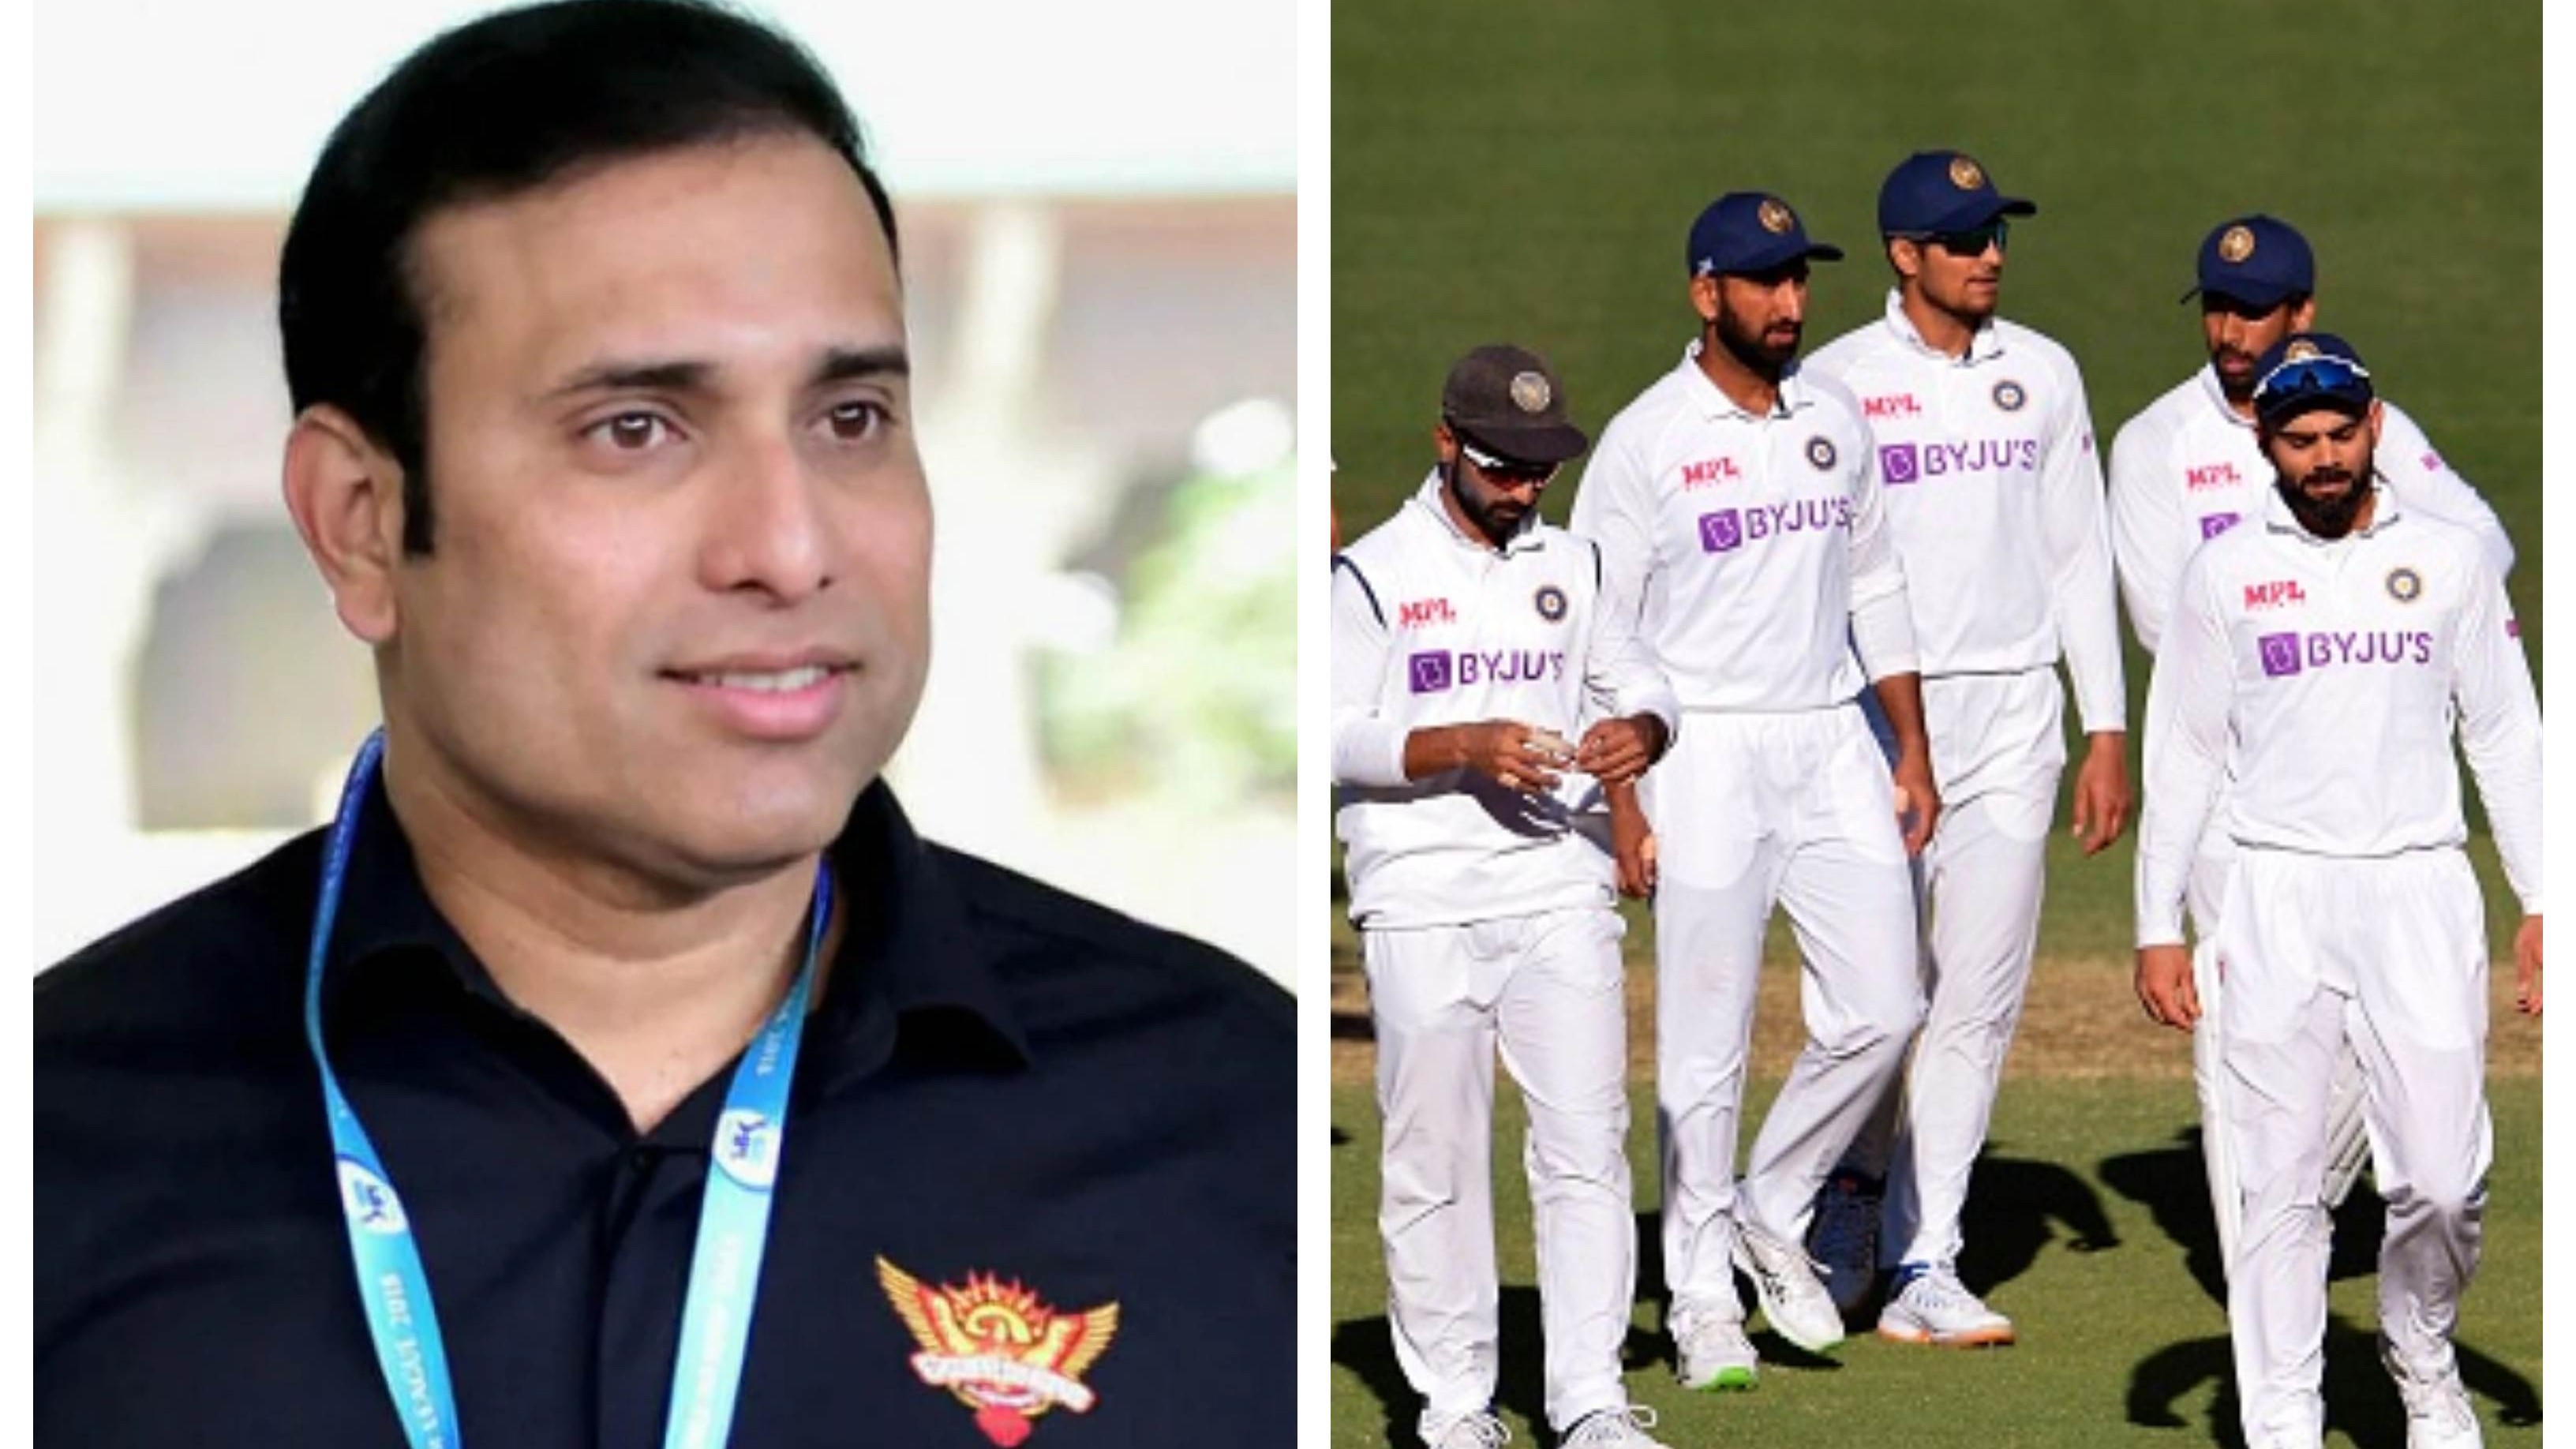 AUS v IND 2020-21: ‘Freak occurrence at Adelaide should not define Indian players’, says VVS Laxman